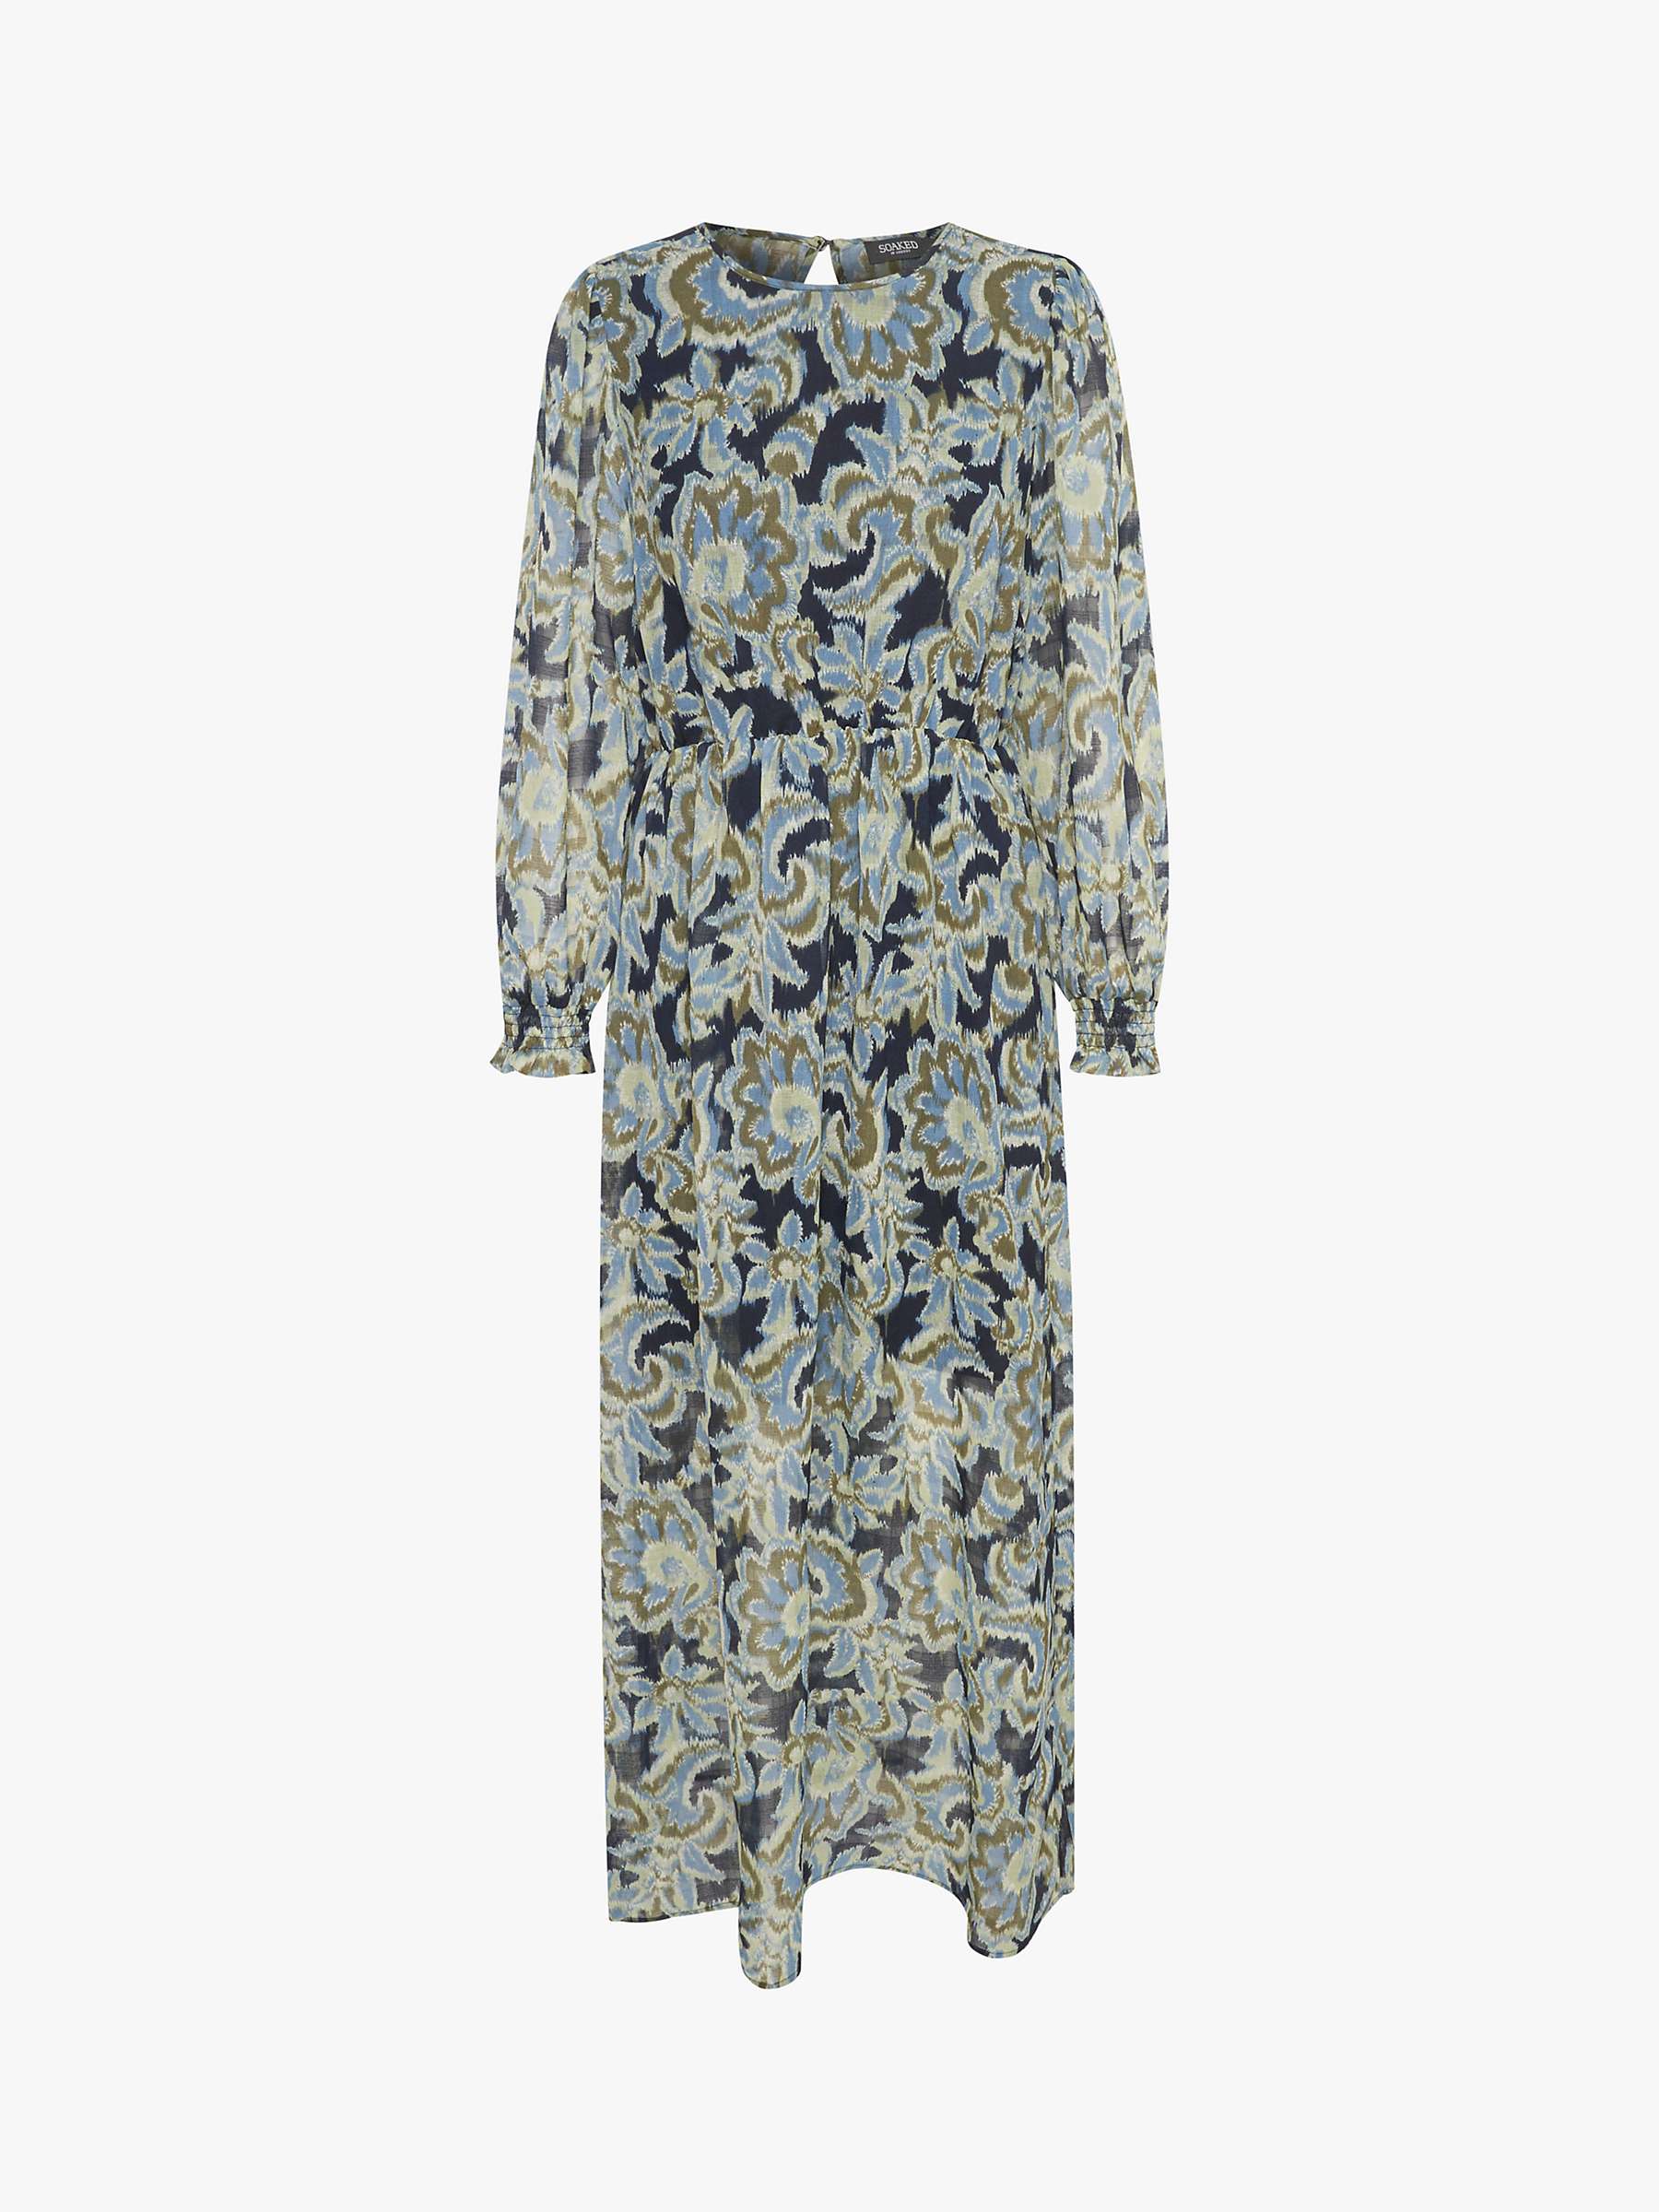 Buy Soaked In Luxury Tiana Long Sleeve Floral Dress, Night Sky Online at johnlewis.com